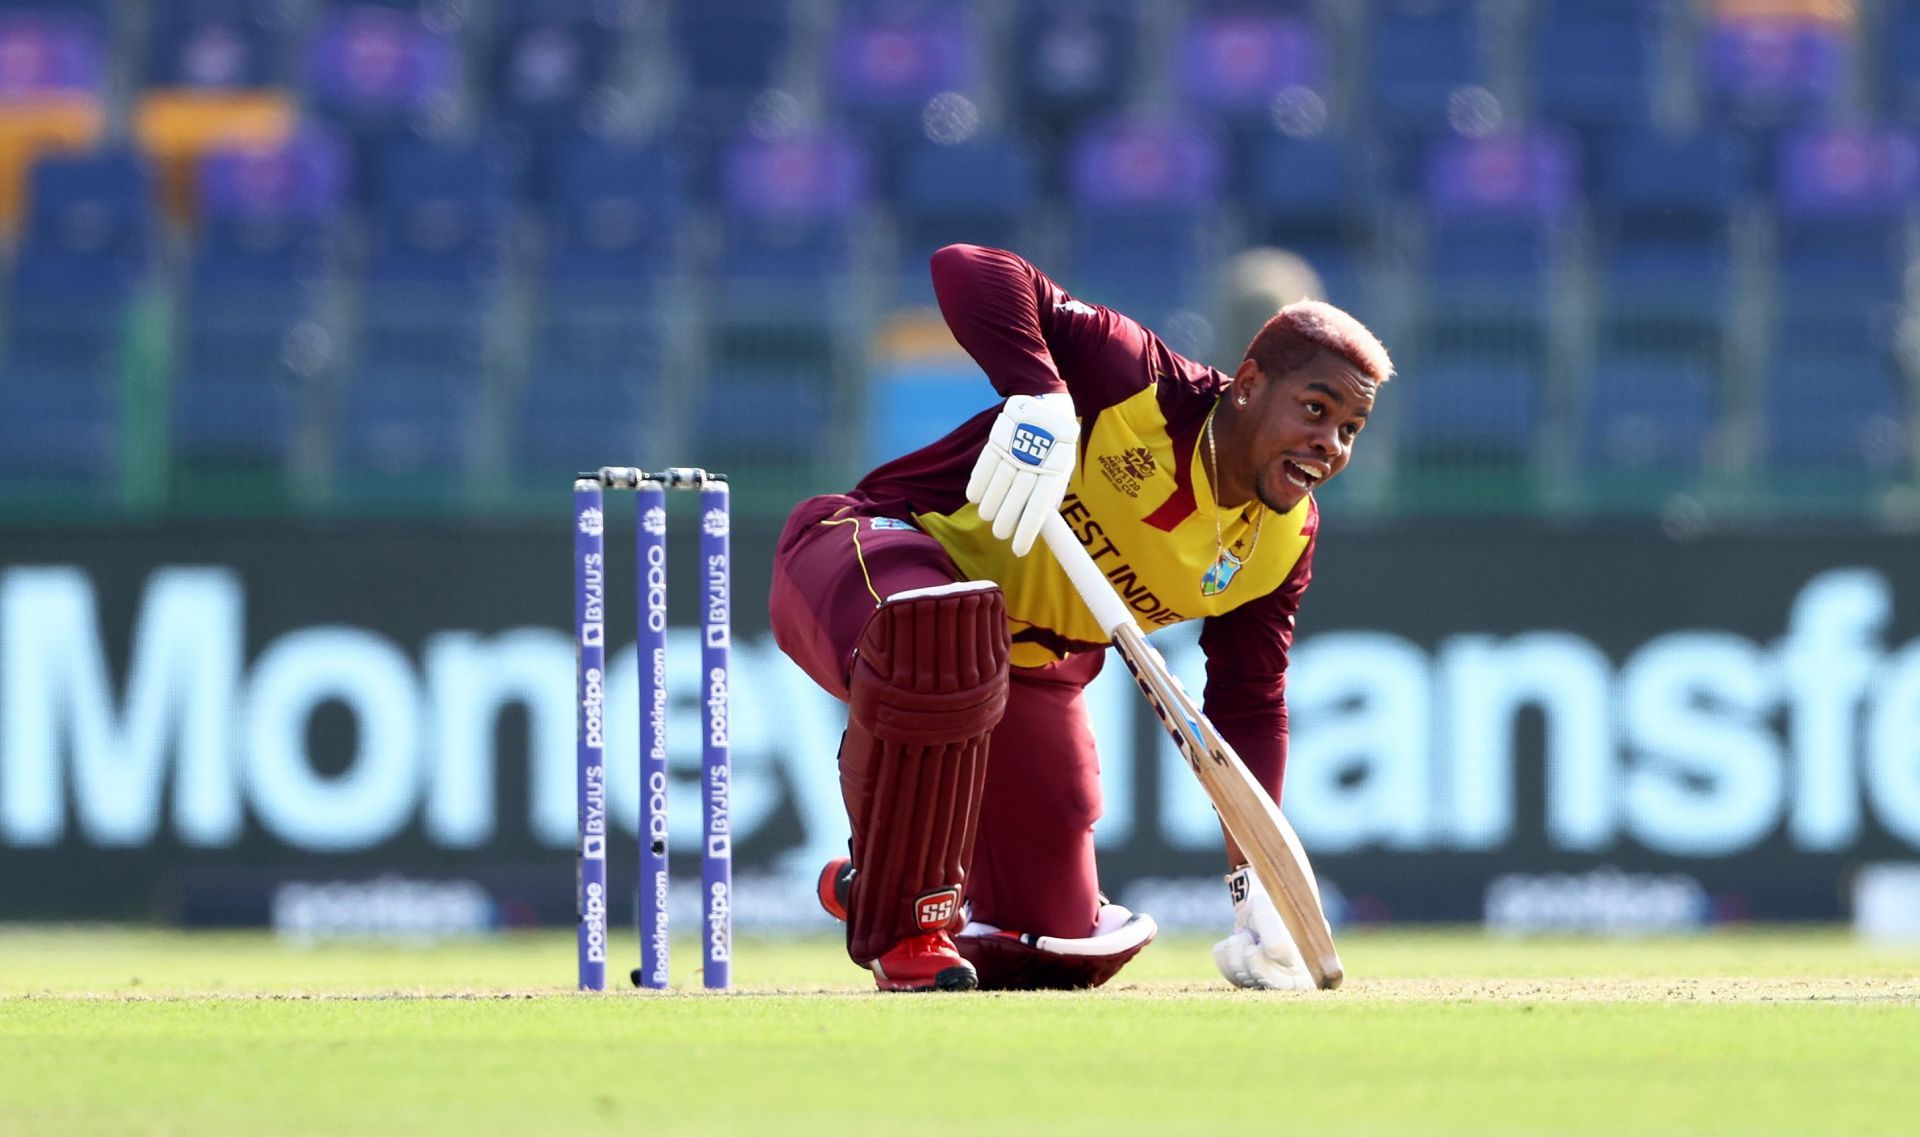 Shimron Hetmyer has a forgettable ODI series. (Pic: Getty Images)